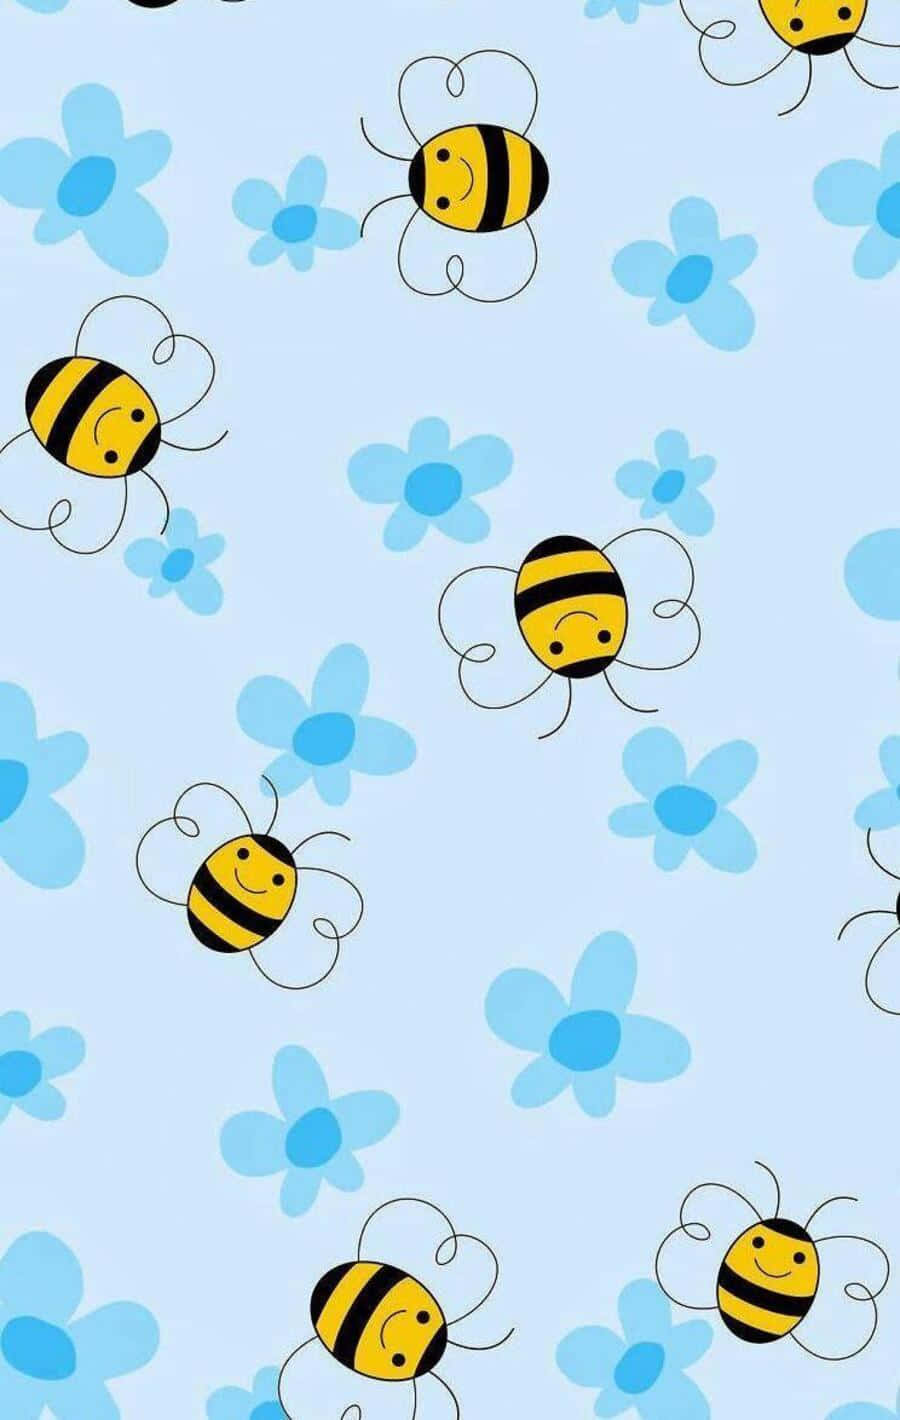 Aesthetic Bee with Flowers and Leaves Wallpaper